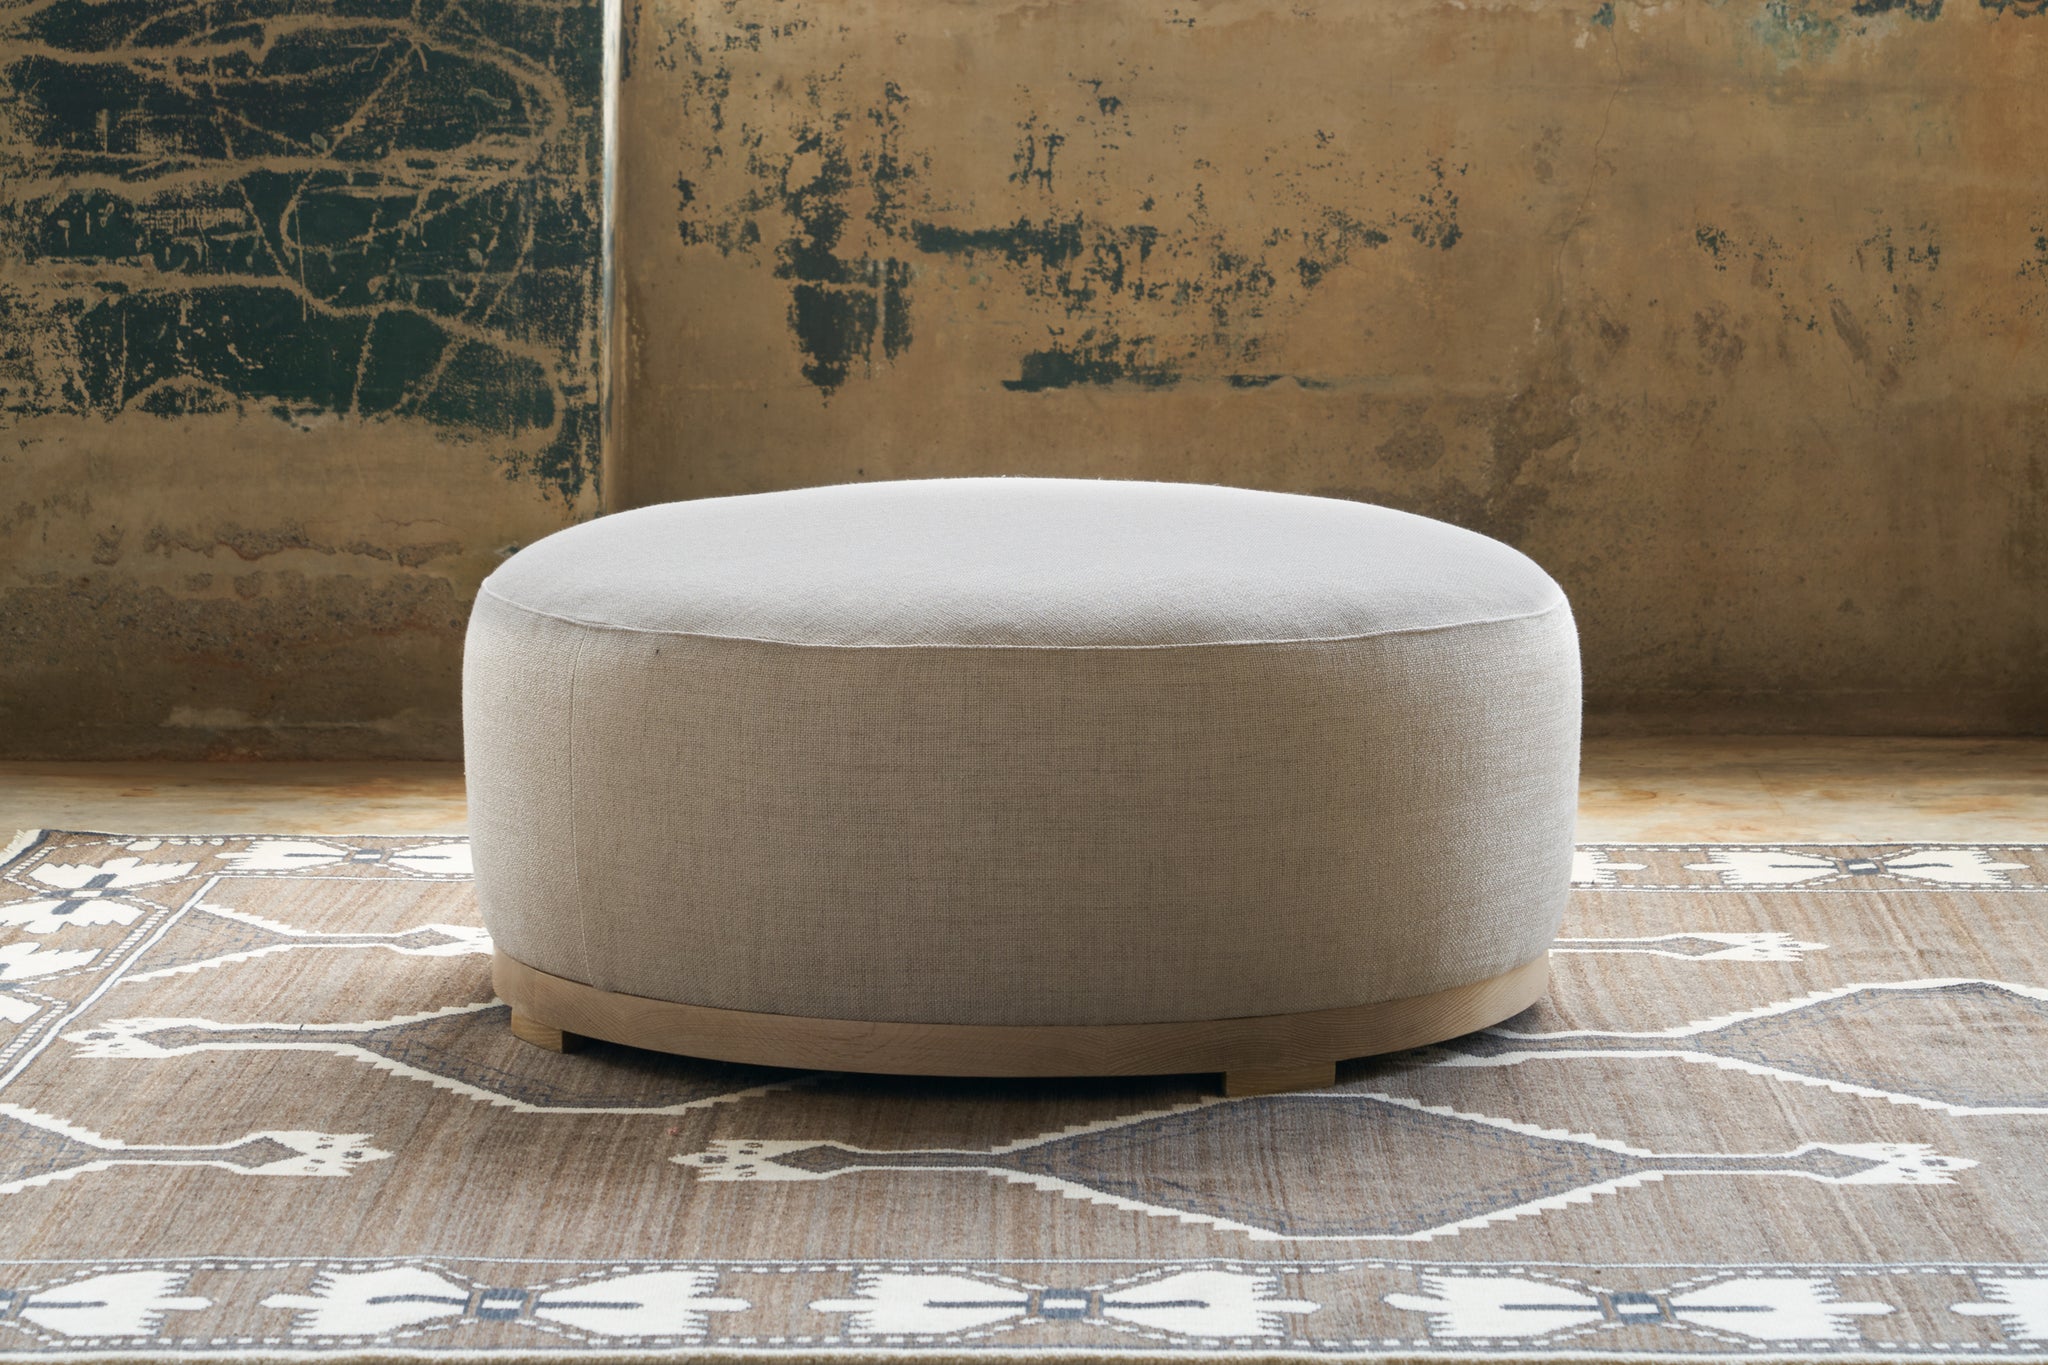  Marco Ottoman in Bellamy Natural on top of a textured rug. Photographed in Bellamy Natural. 